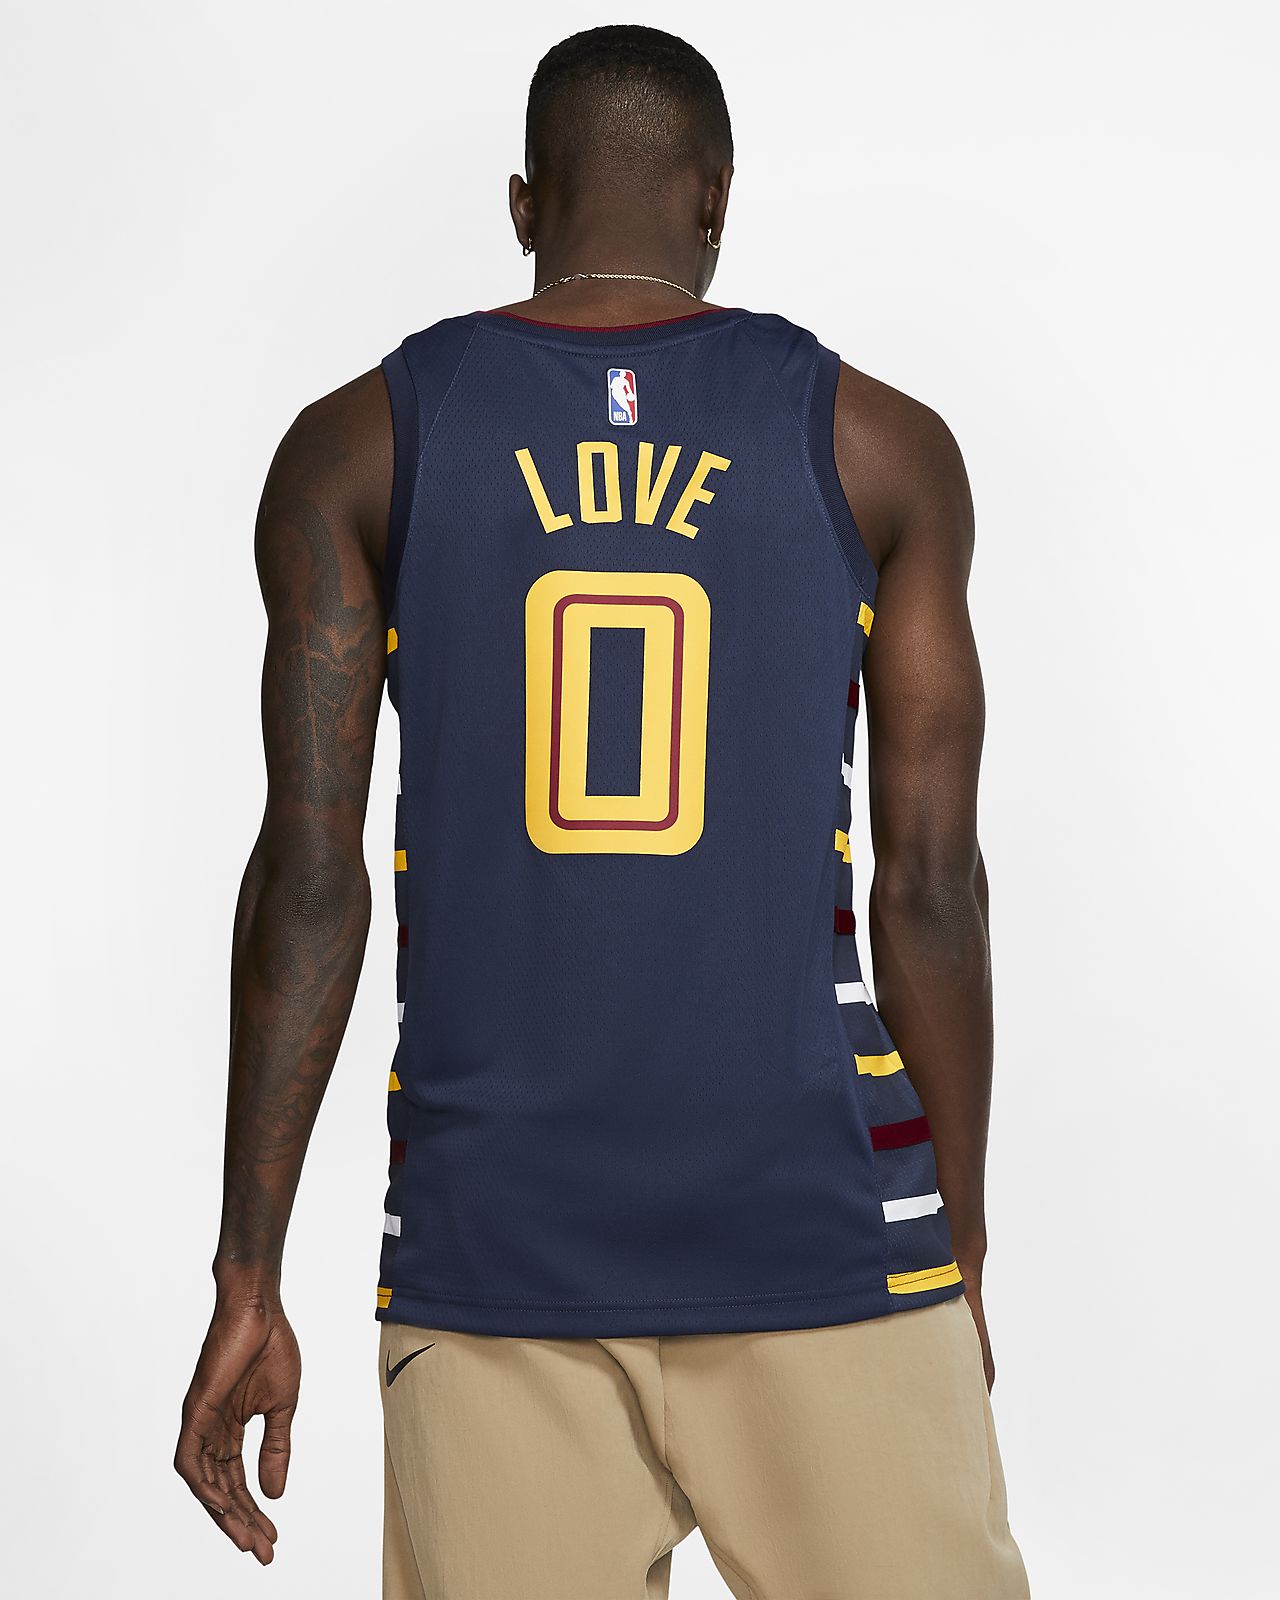 kevin love womens jersey